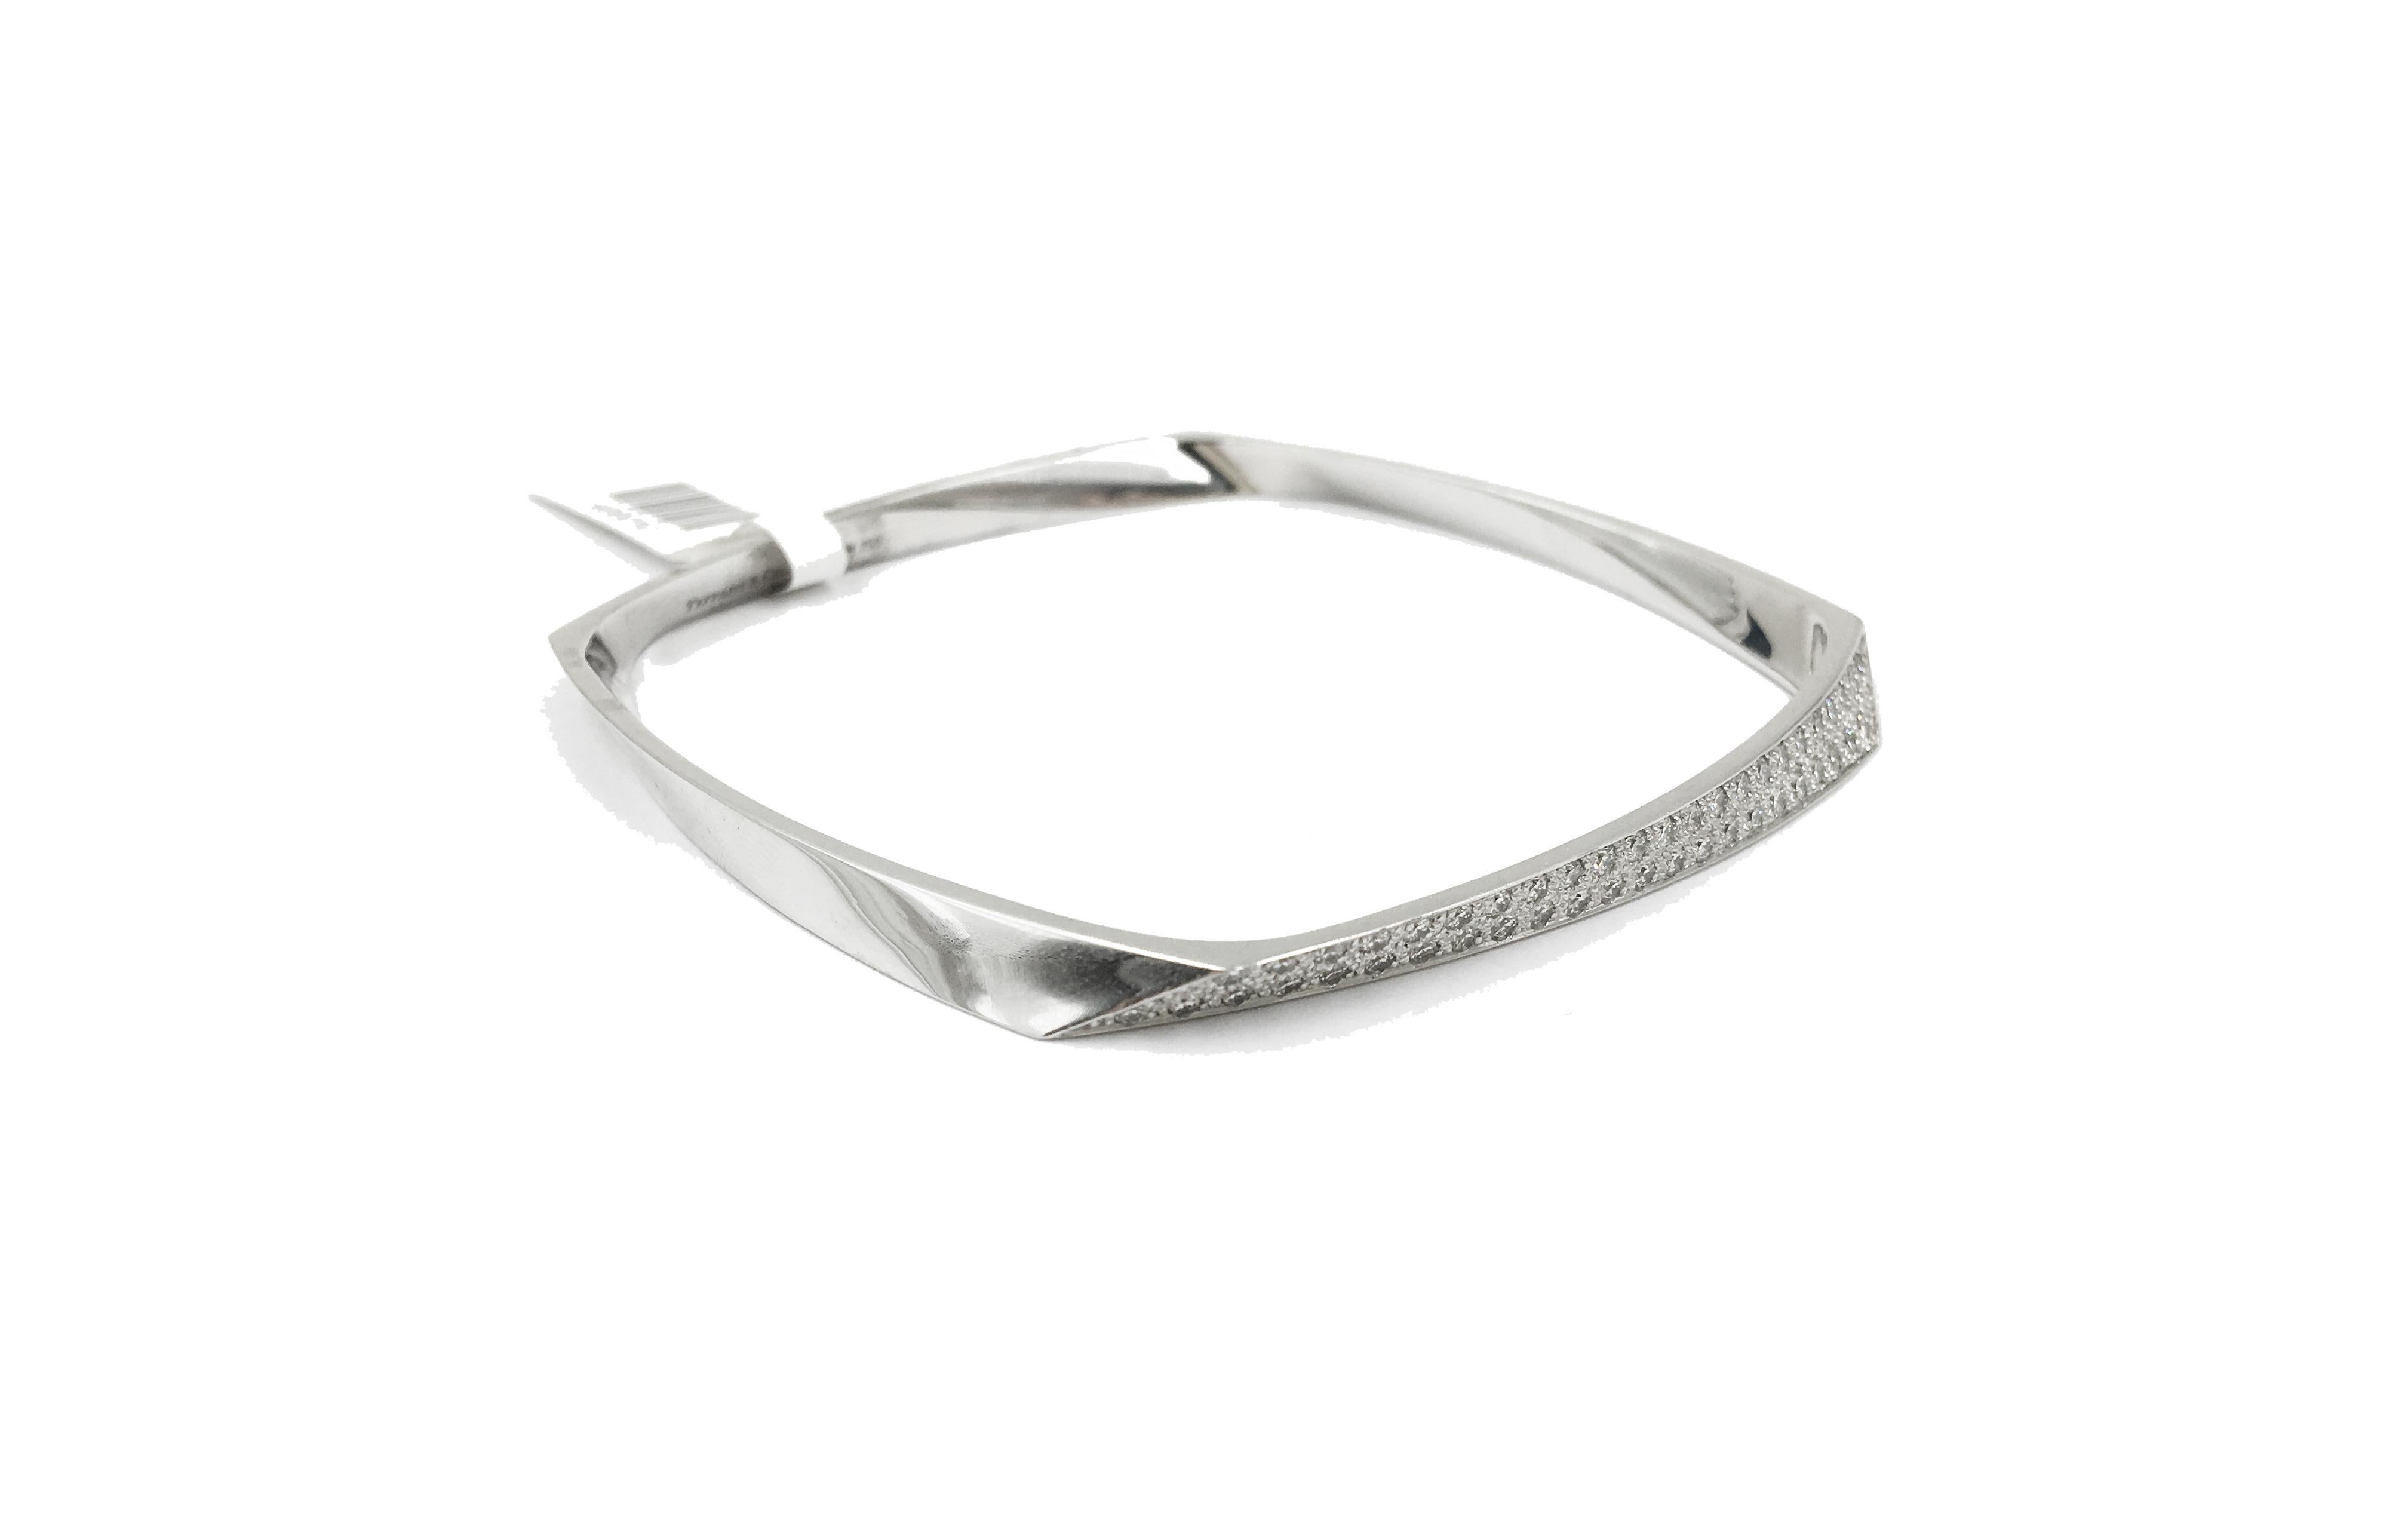 Tiffany & Co. Frank Gehry Torque White Gold Diamond Bangle For Sale 4